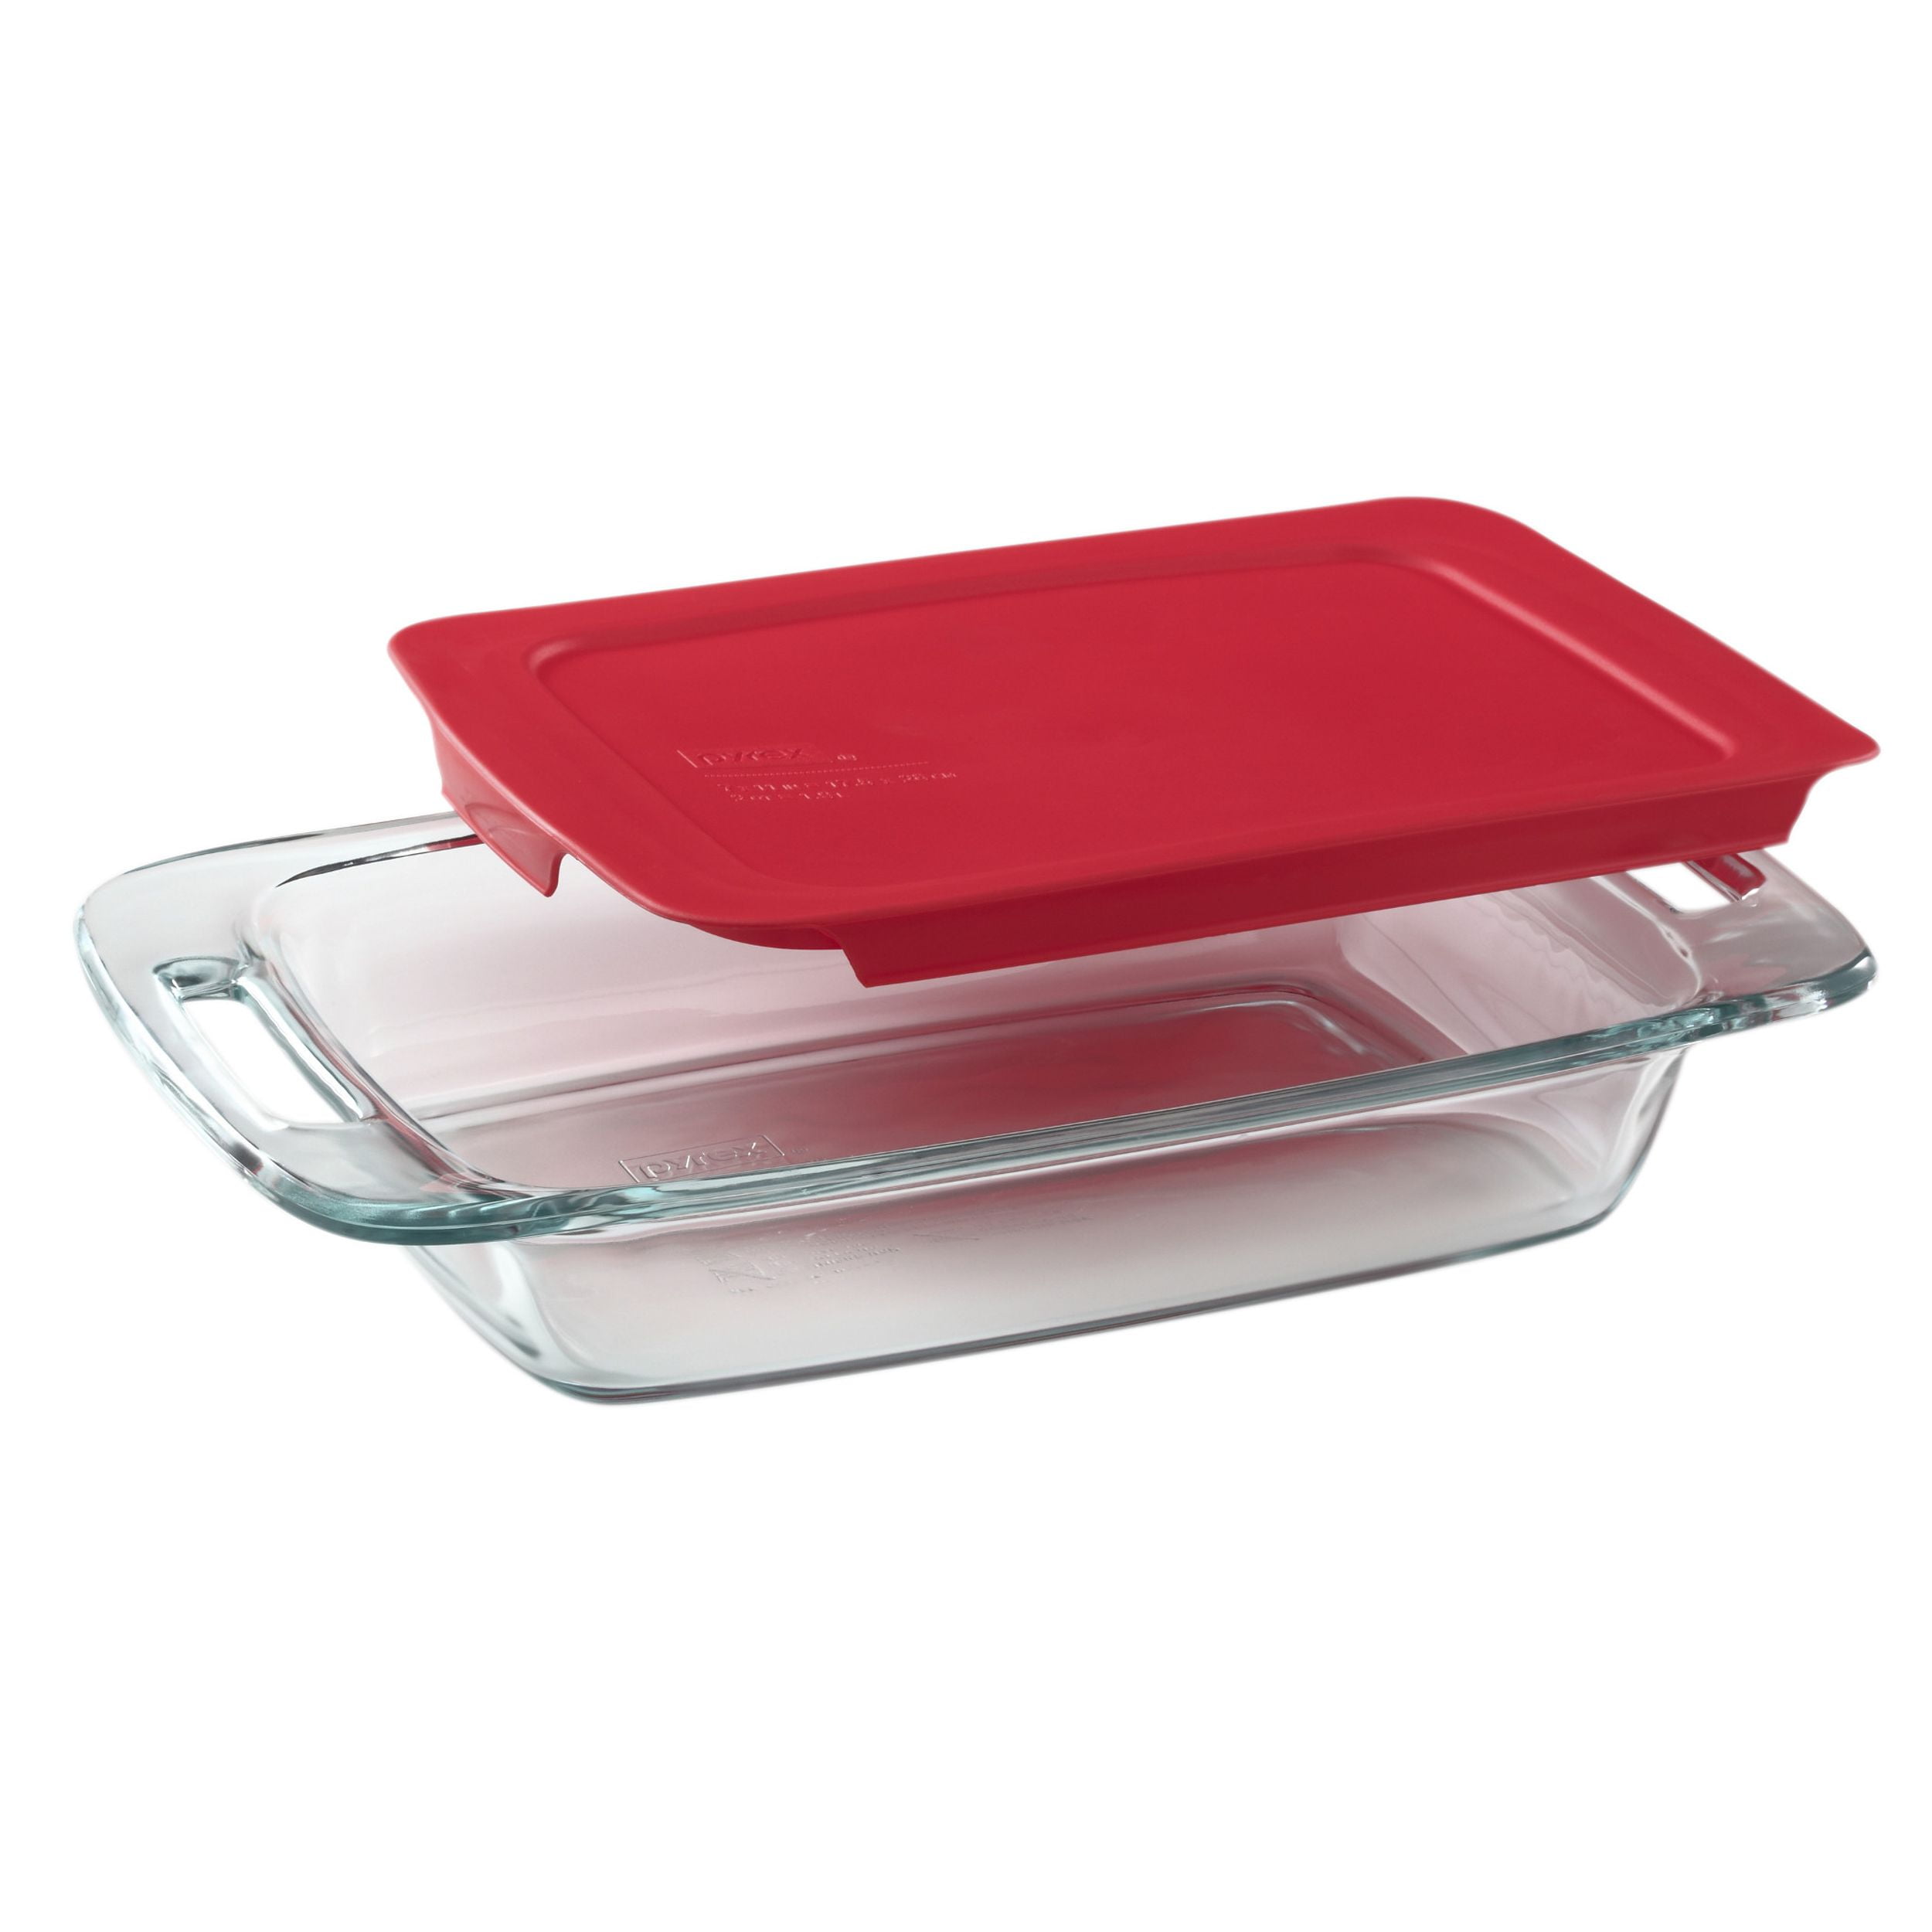 Pyrex 8 x 8 Clear Glass Baking Dish Pan Red Lid with Handles 2 Qt 1.9 L  C222